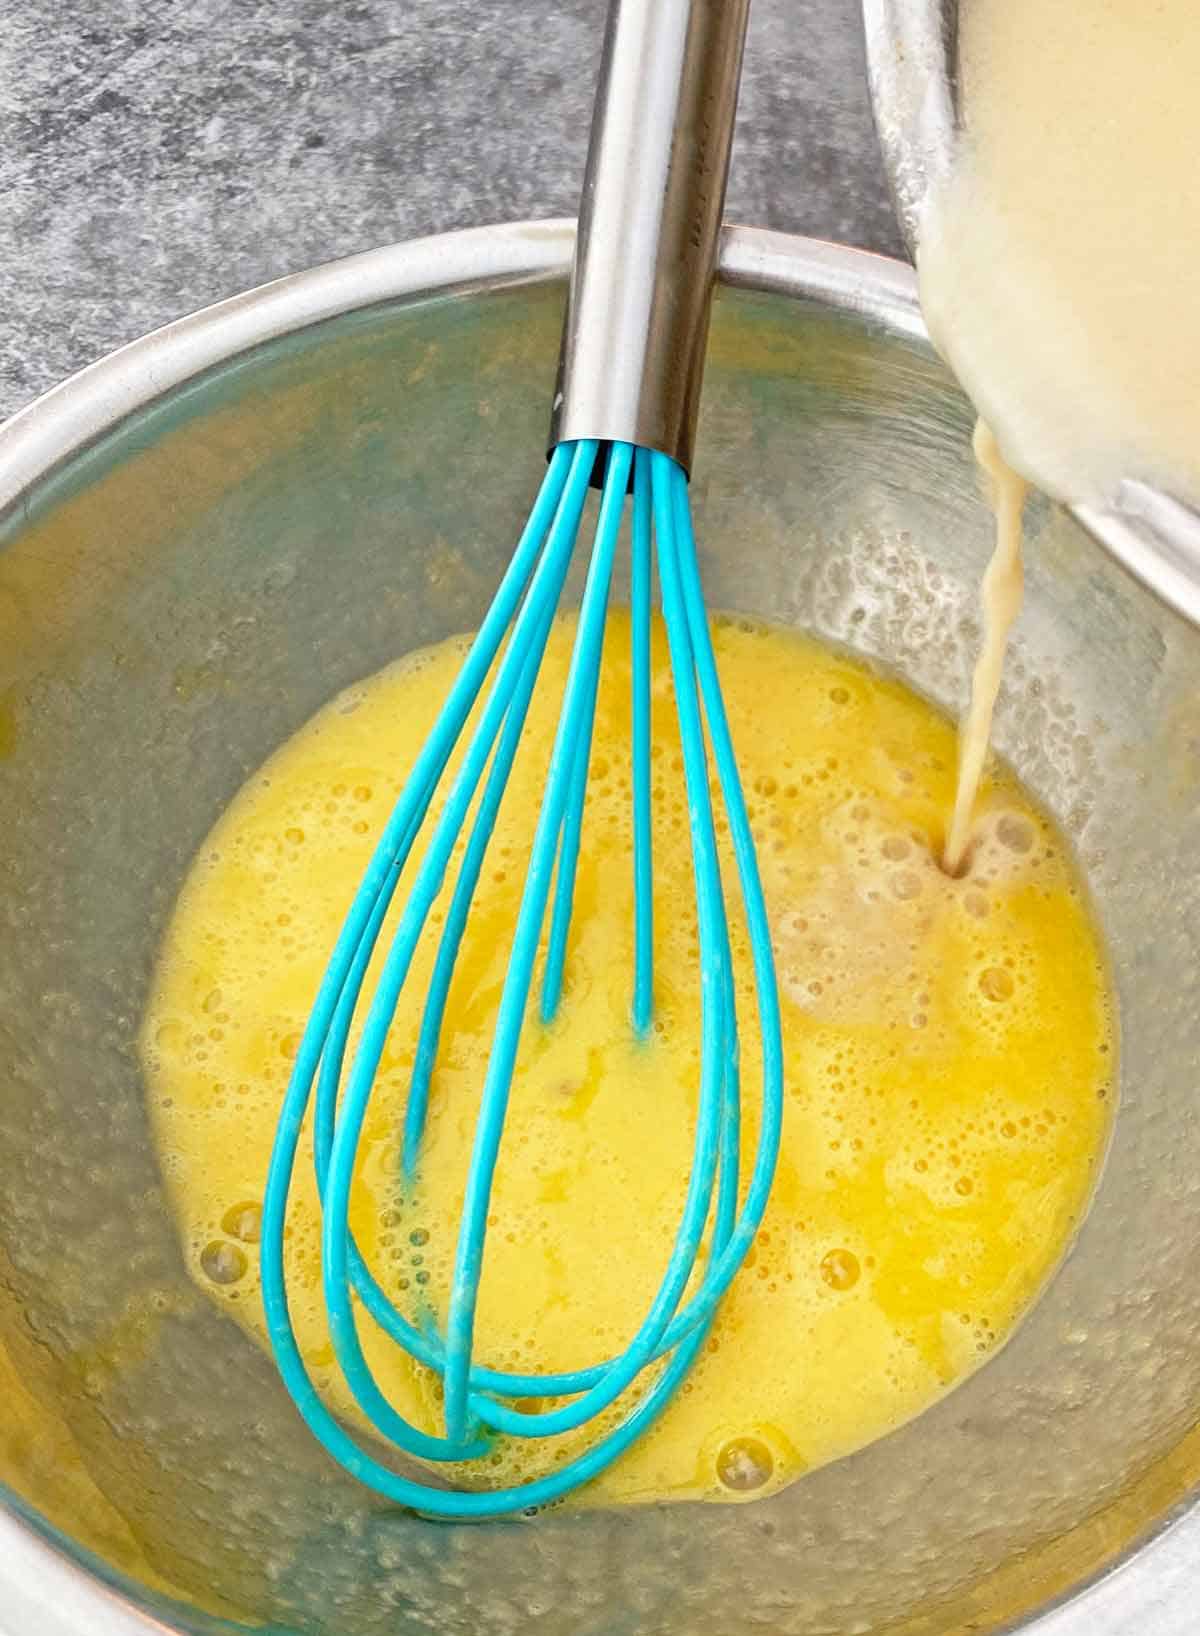 Blending the milk mixture into the beaten eggs with a blue whisk.